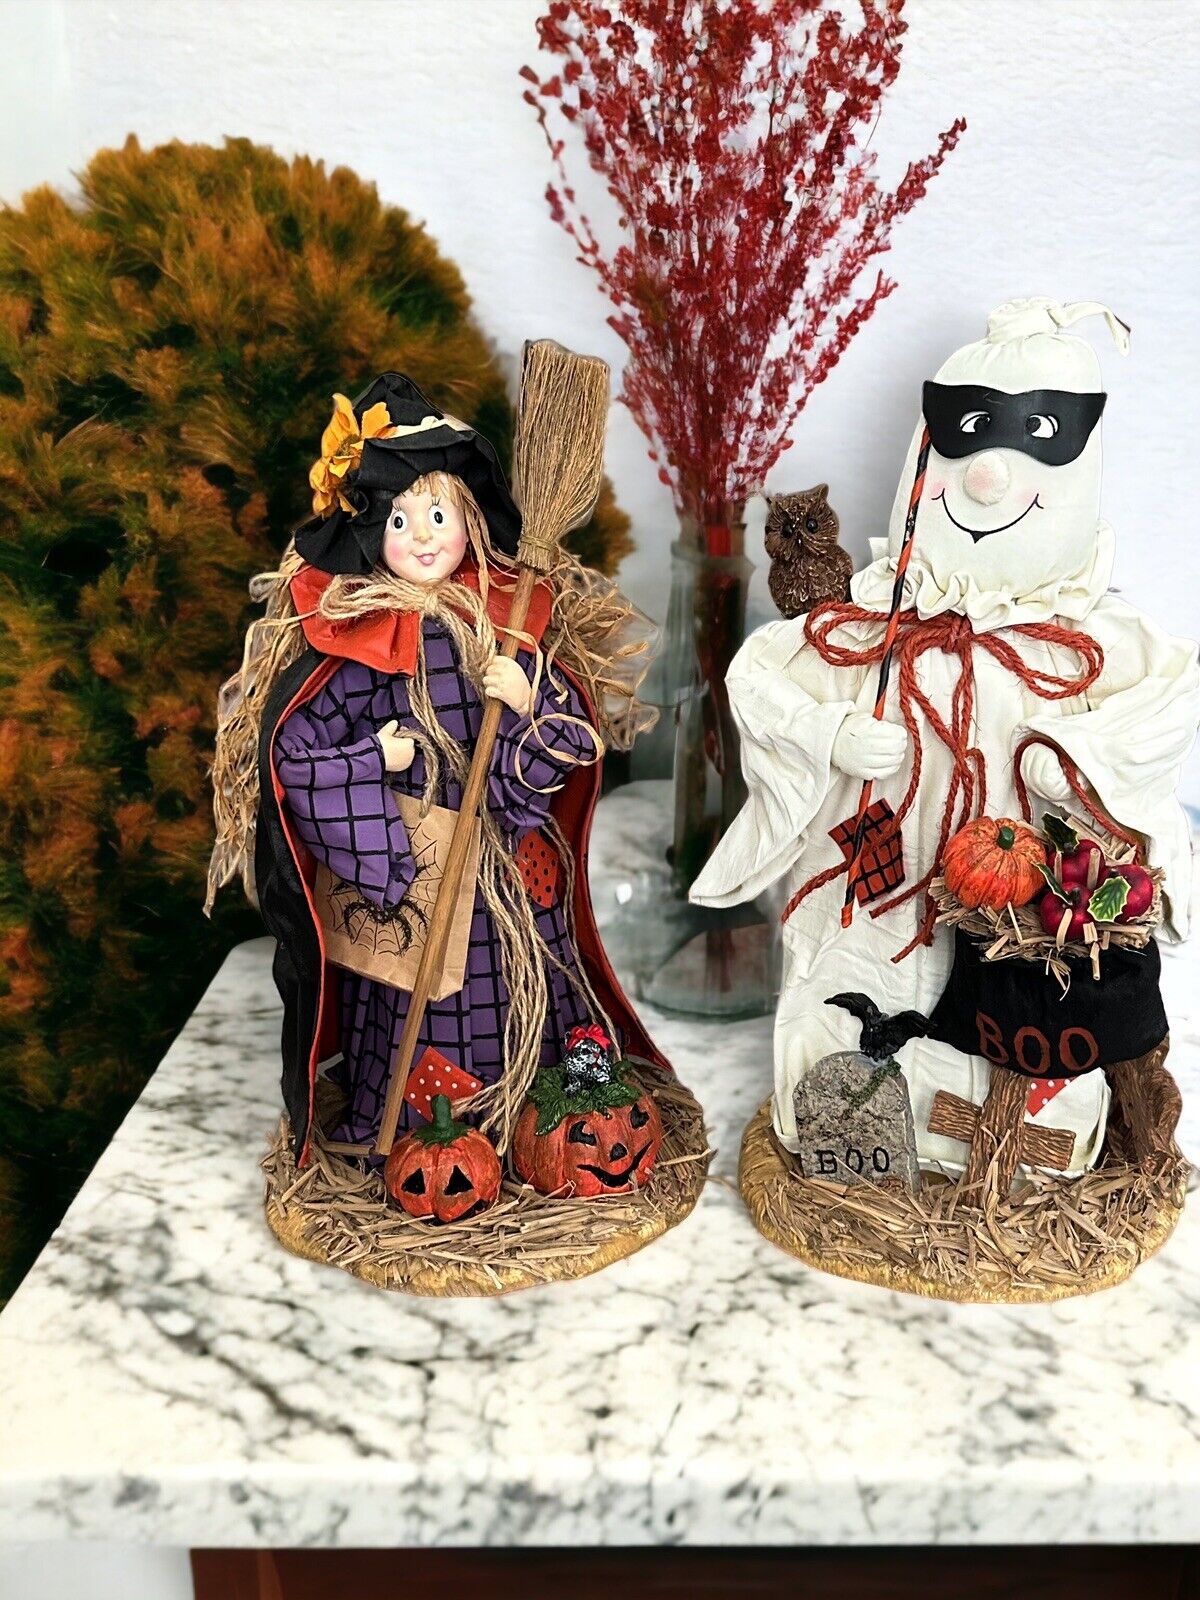 Vintage Halloween Fabric Mache 13” Witch & Ghost Statue Figurines Holiday Decor